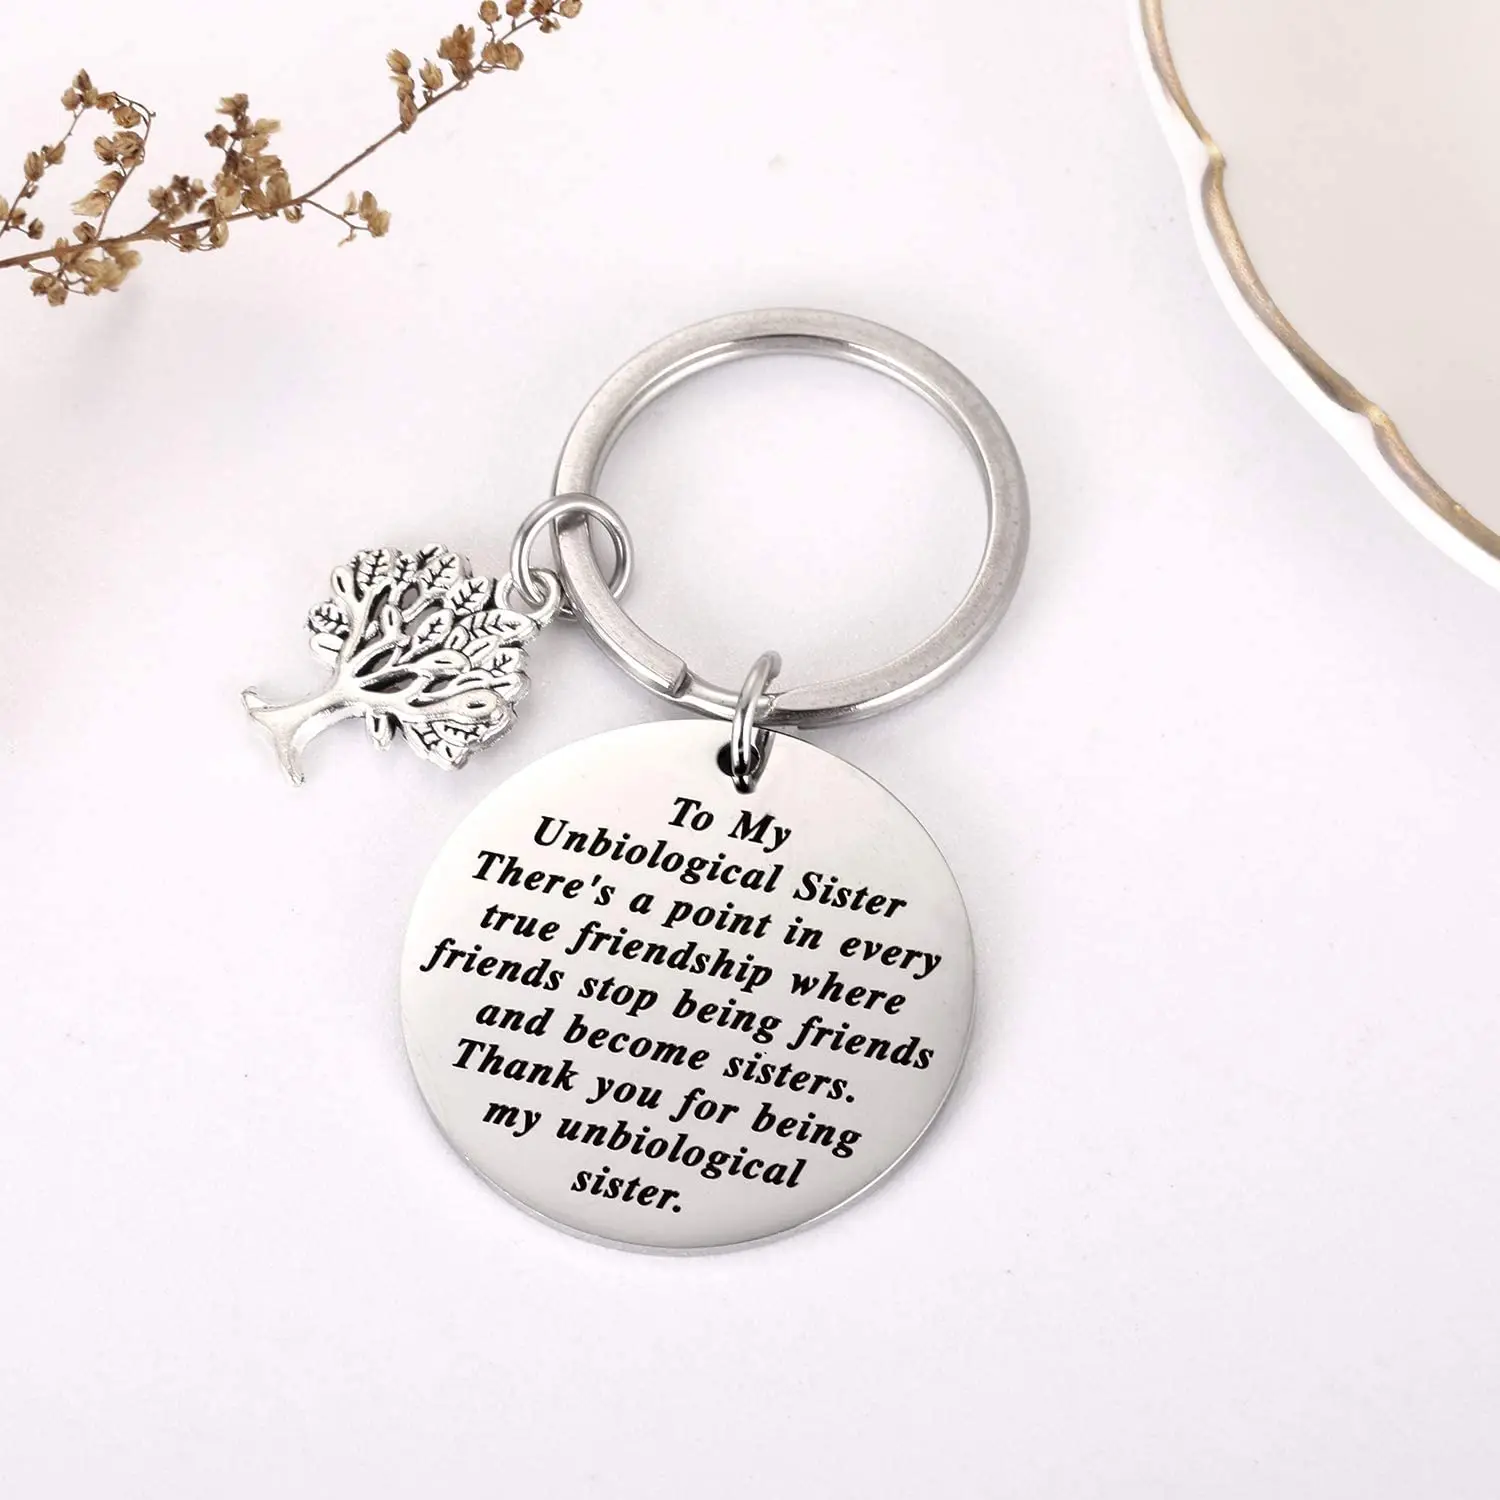 LQRI Unbiological Sister Keychain Sister In Law Gift We Weren't Sisters by Birth But We Knew from The Start 